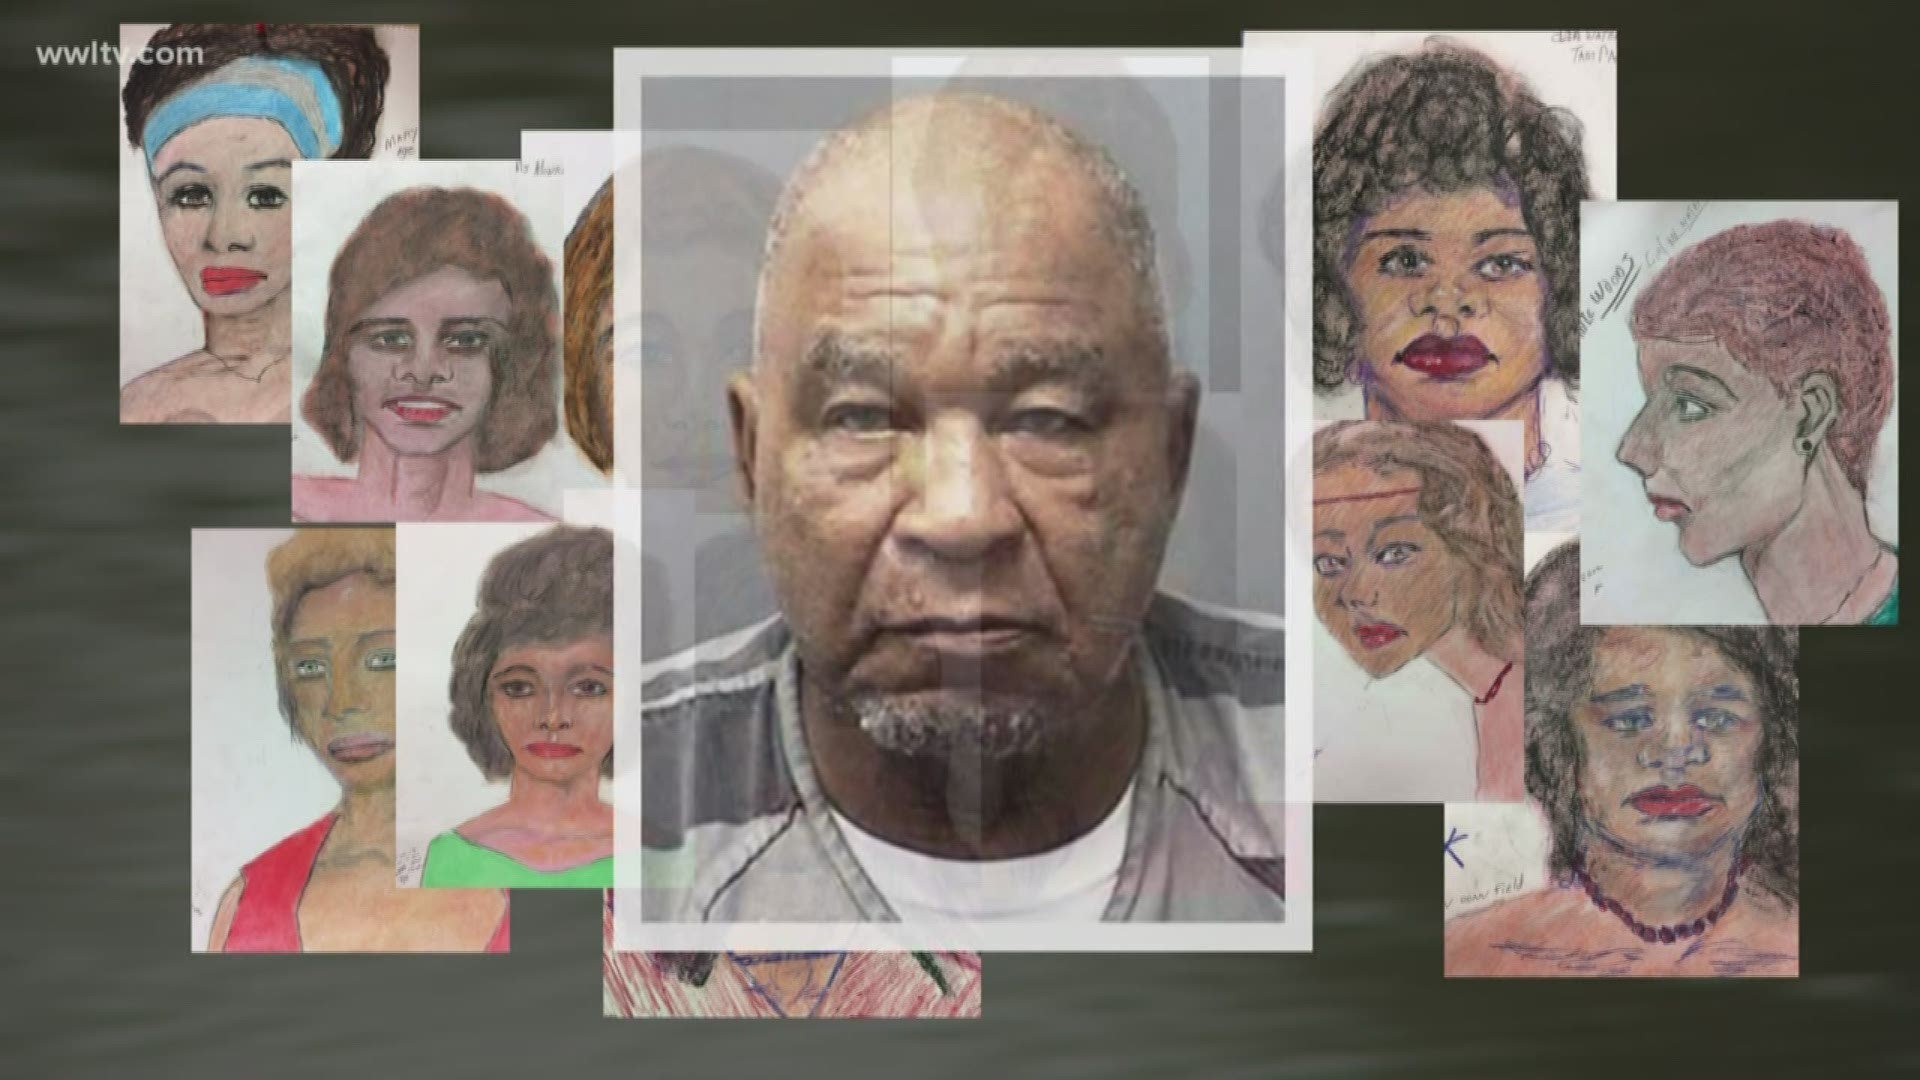 He's confessed to 93 murders from 1970 to 2005 and the FBI believes these confessions are credible.